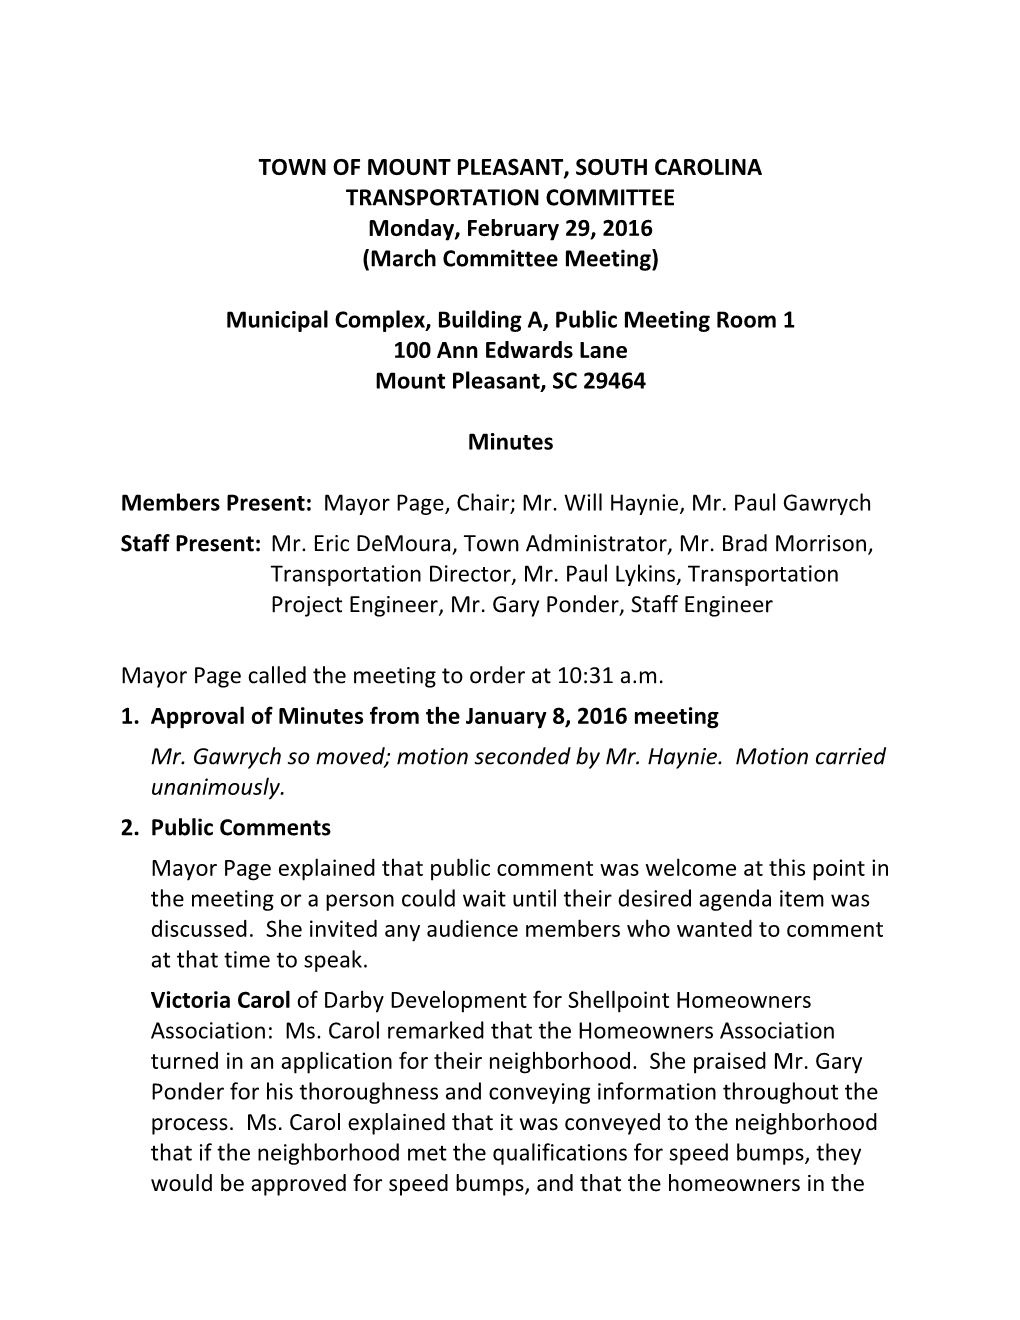 TOWN of MOUNT PLEASANT, SOUTH CAROLINA TRANSPORTATION COMMITTEE Monday, February 29, 2016 (March Committee Meeting)